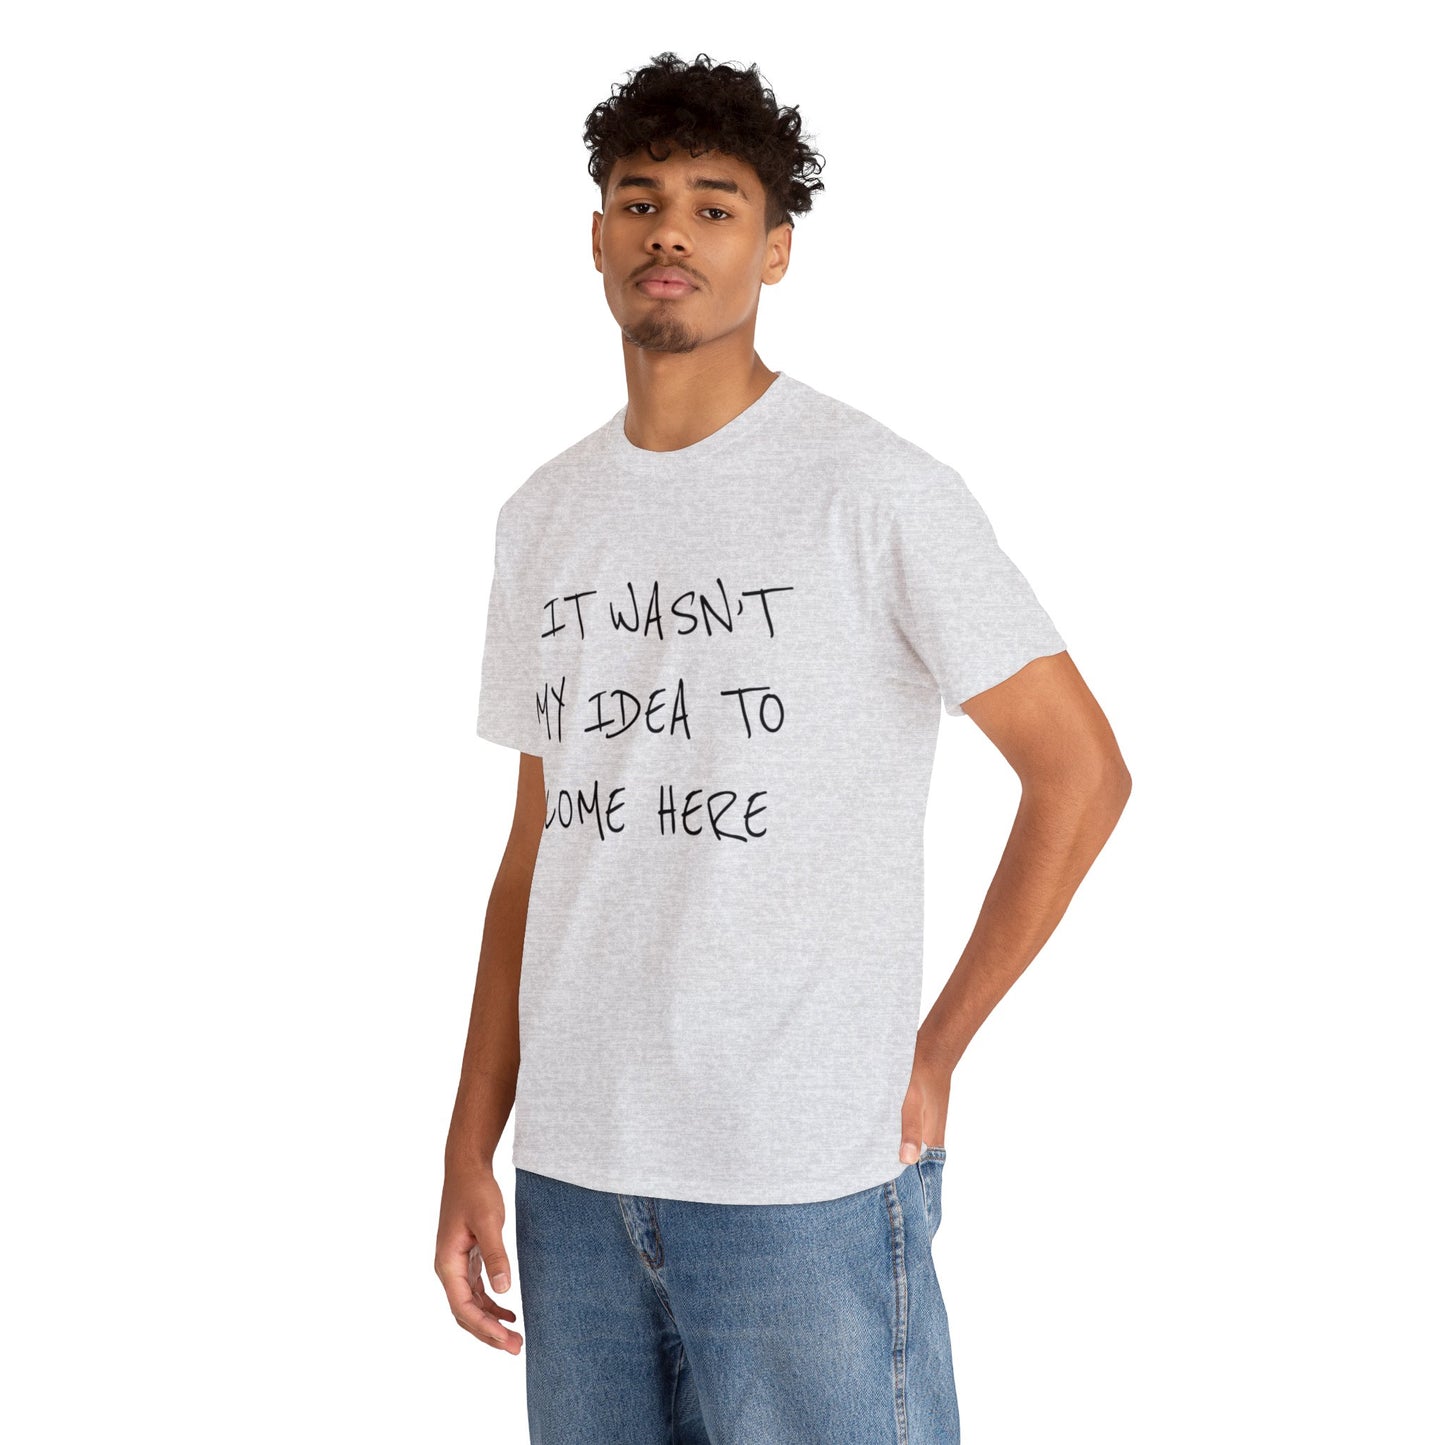 "IT WASN’T MY IDEA TO COME HERE" Text T-shirt Unisex Heavy Cotton Tee Simple Text for Travelers.